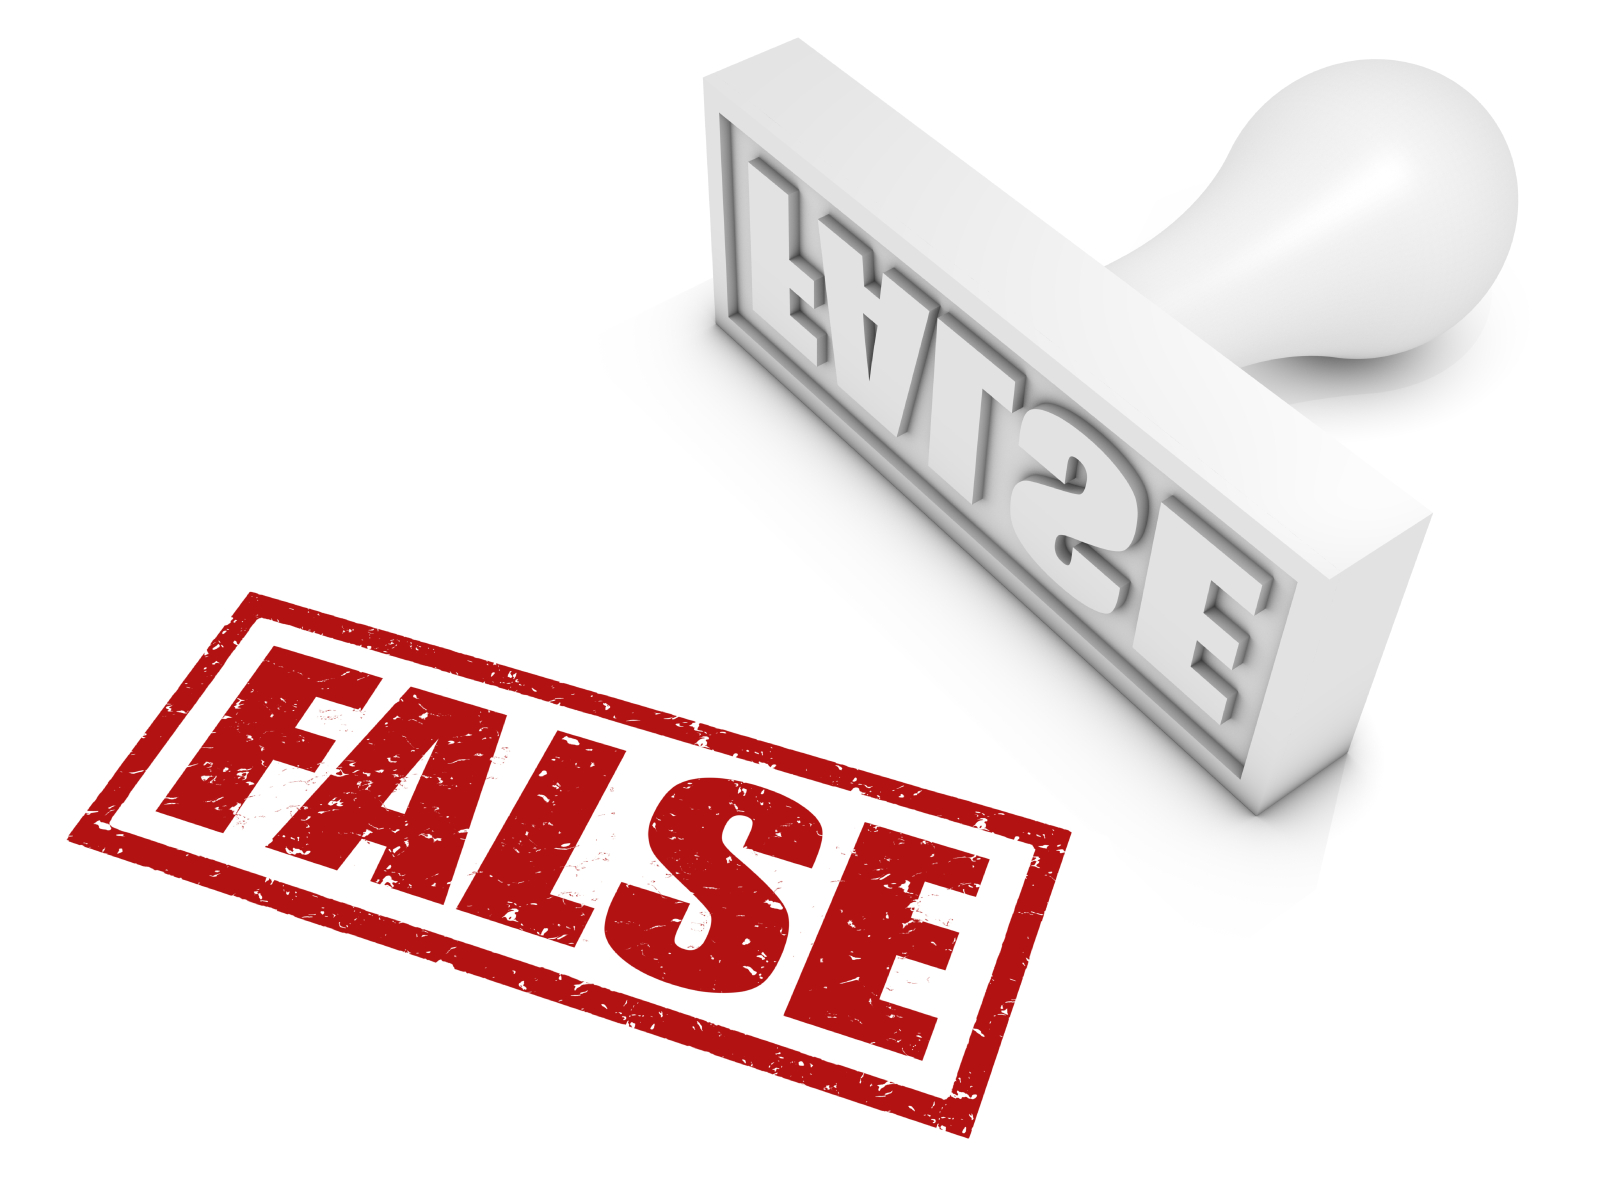 Fact check: False claim that classified documents were found at the University of Delaware